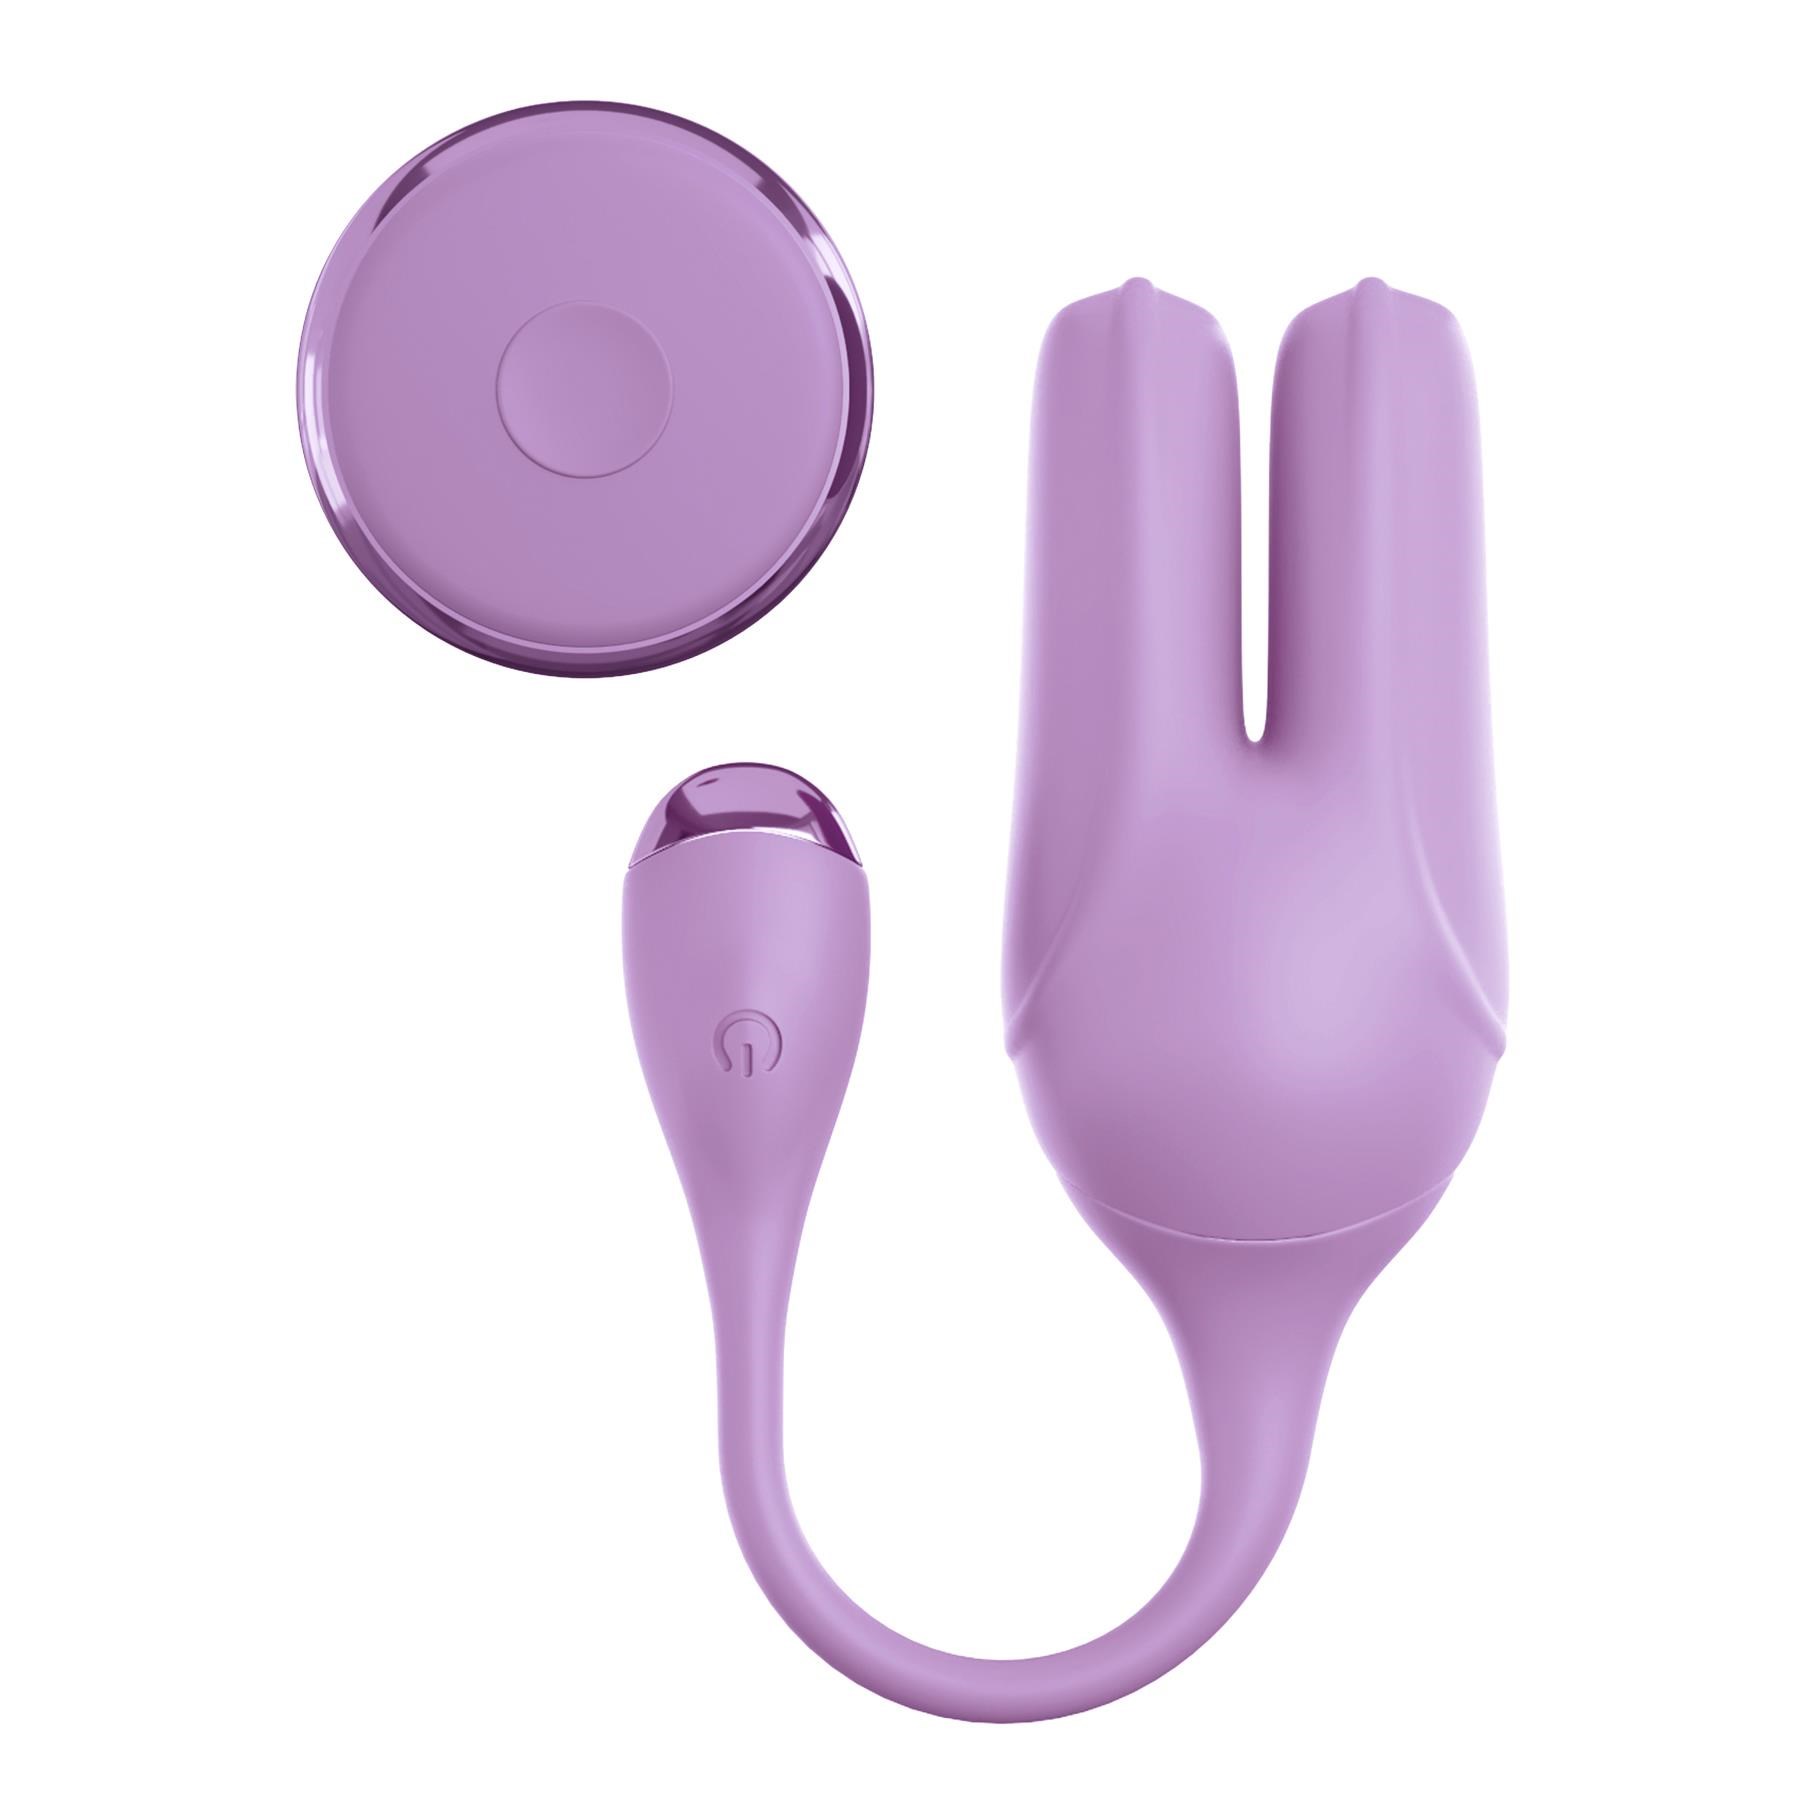 Jimmy Jane Form 2 Kegel Trainer With Remote Control - Product and Remote